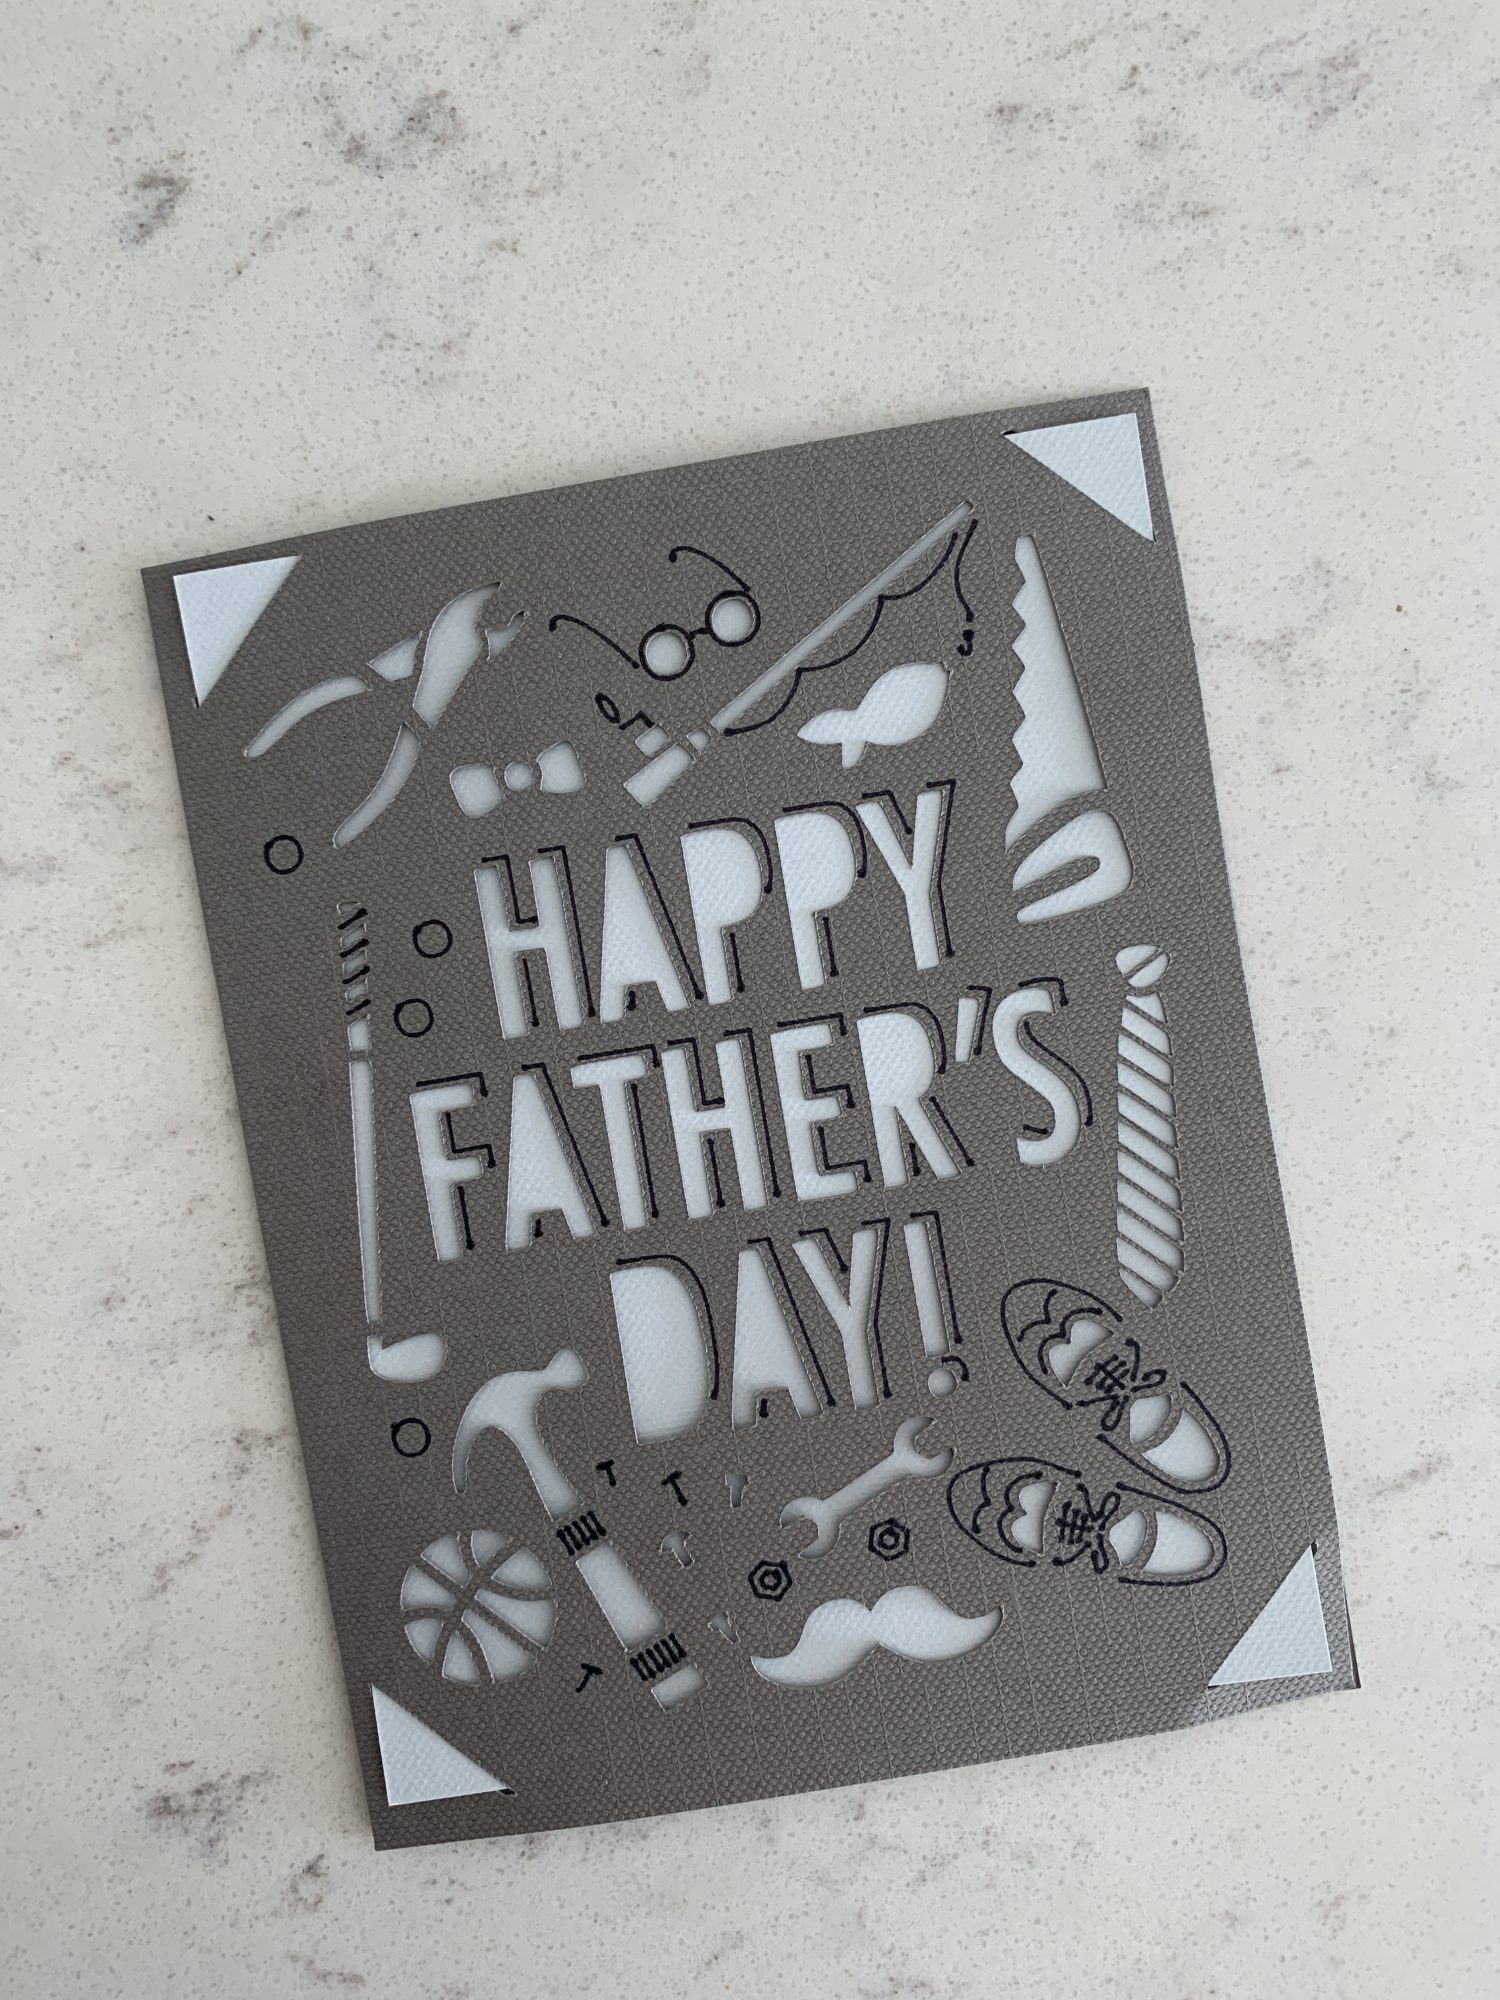 ideas for father's day card